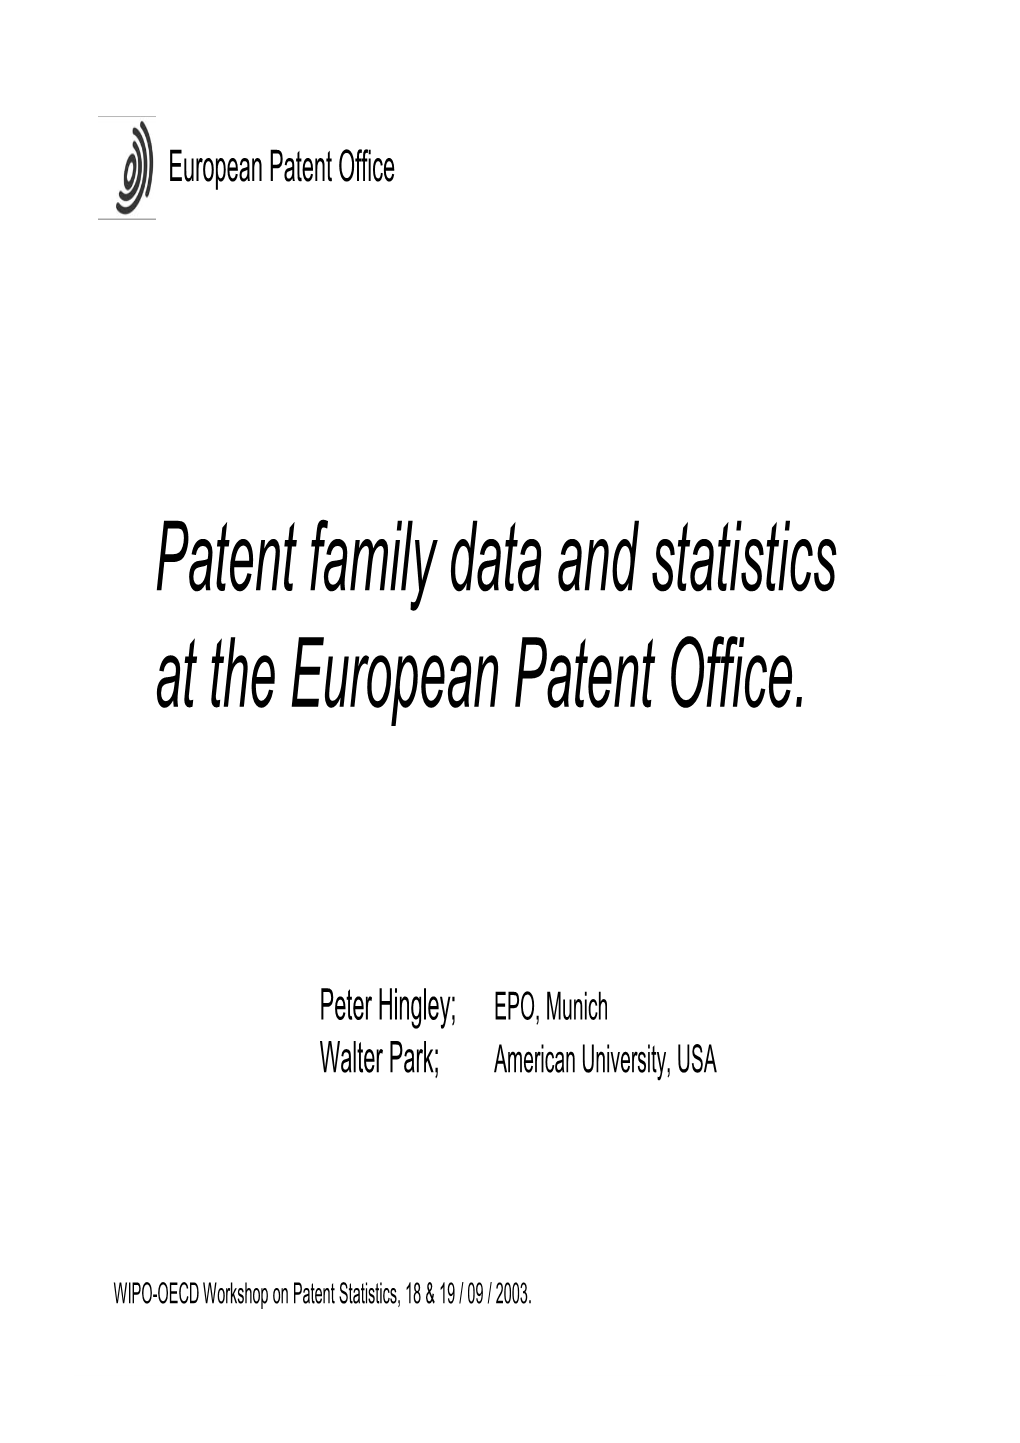 Patent Family Data and Statistics at the European Patent Office